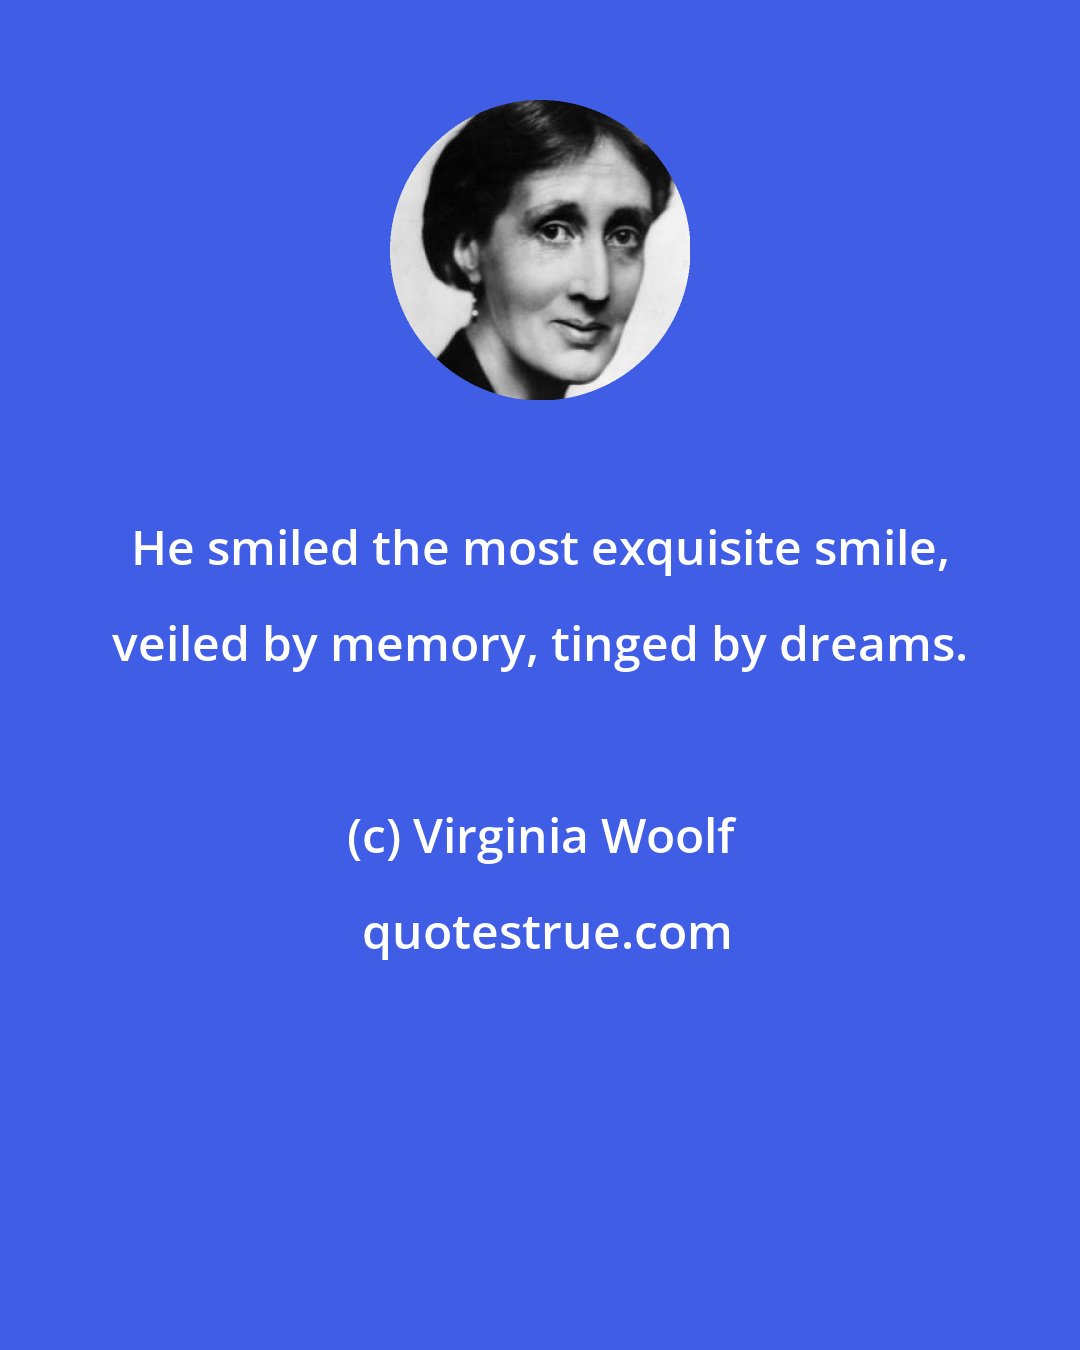 Virginia Woolf: He smiled the most exquisite smile, veiled by memory, tinged by dreams.